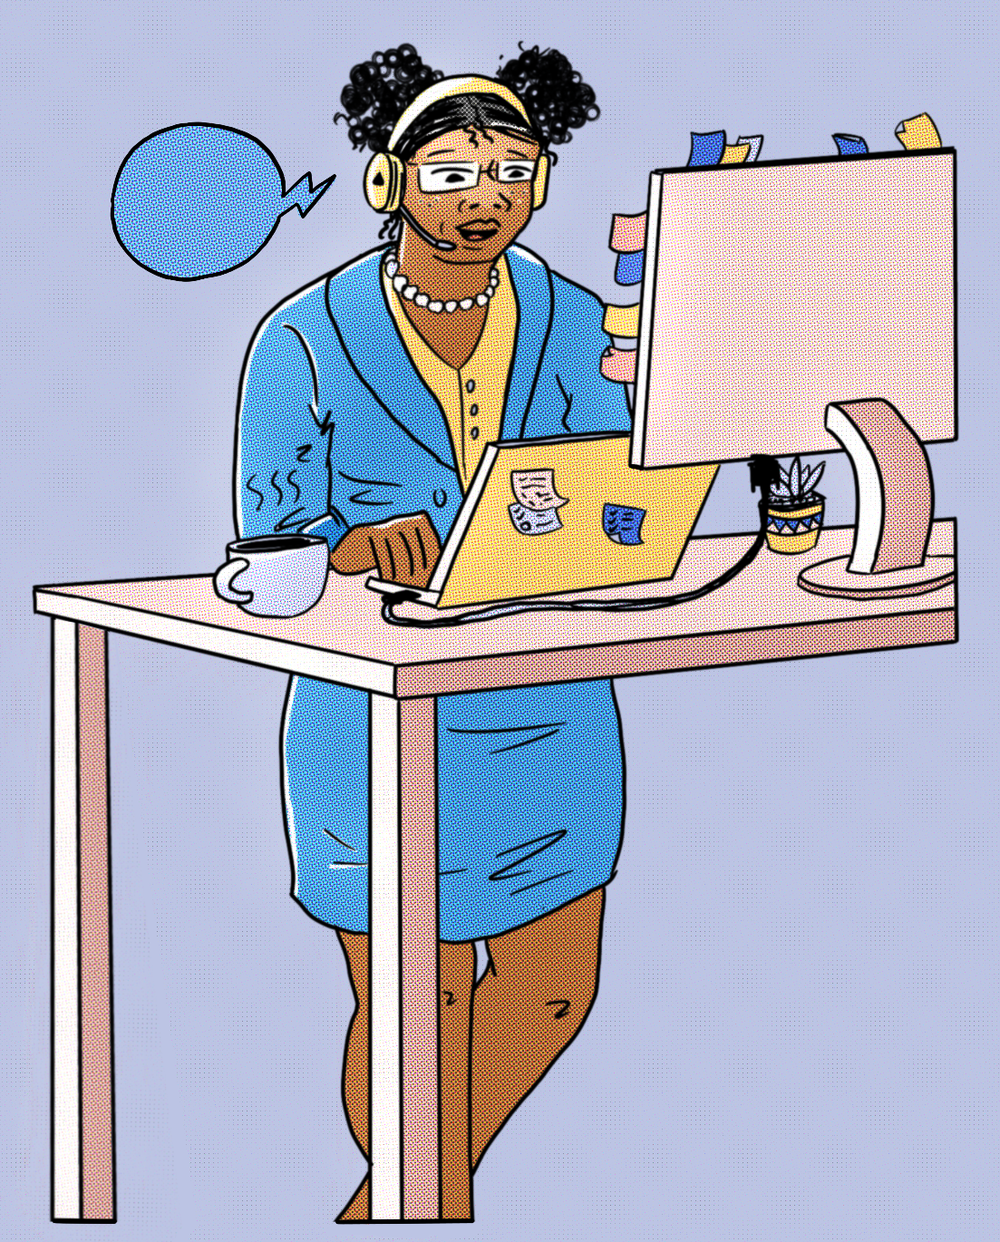 You can break up all the sitting that computer work requires by taking calls while standing, which burns 50 to 100 calories per hour. Or pace around the office while you talk, which burns even more.